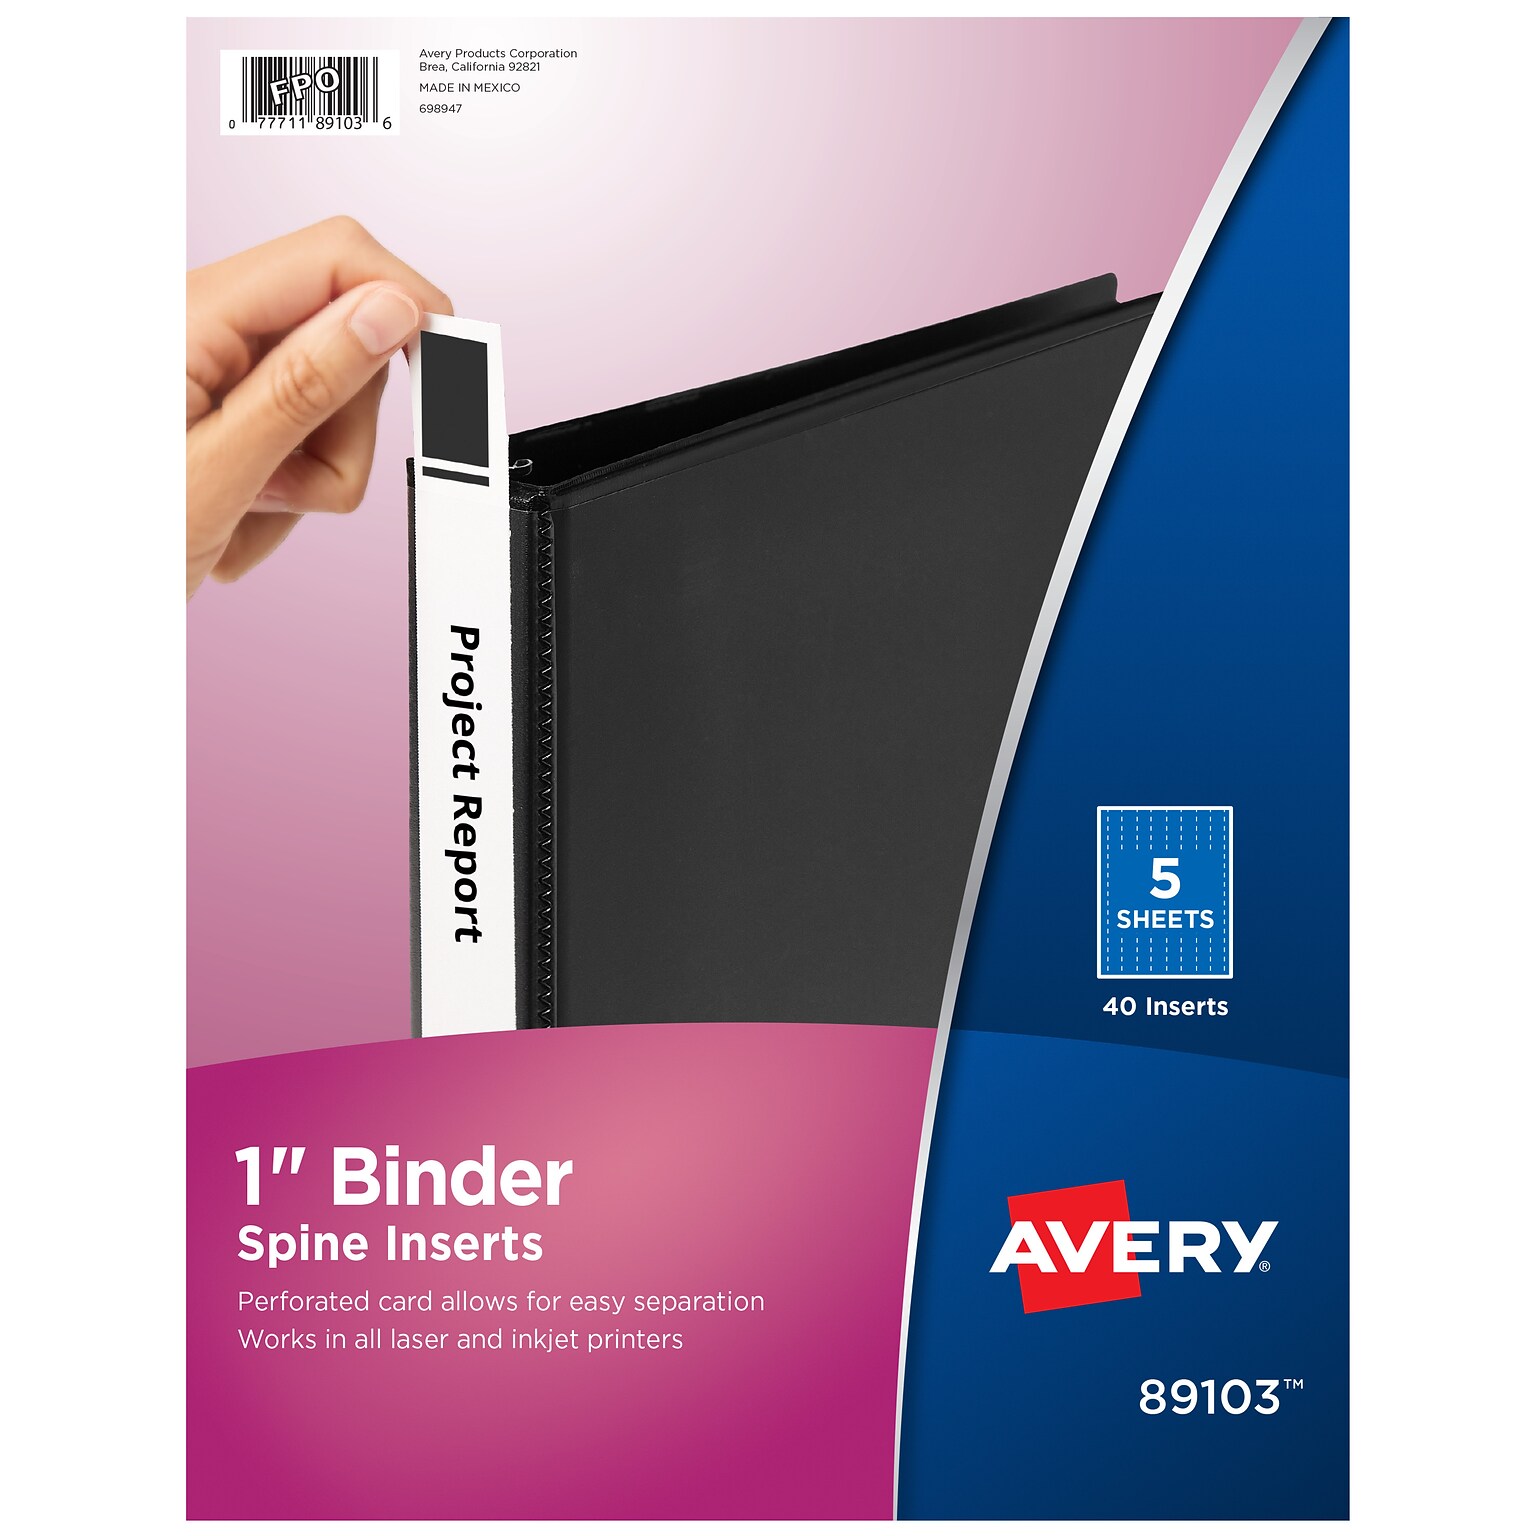 Avery Binder Spine Inserts, For 1 Inch Ring Binders, 40 Cardstock View Binder Spine ID Inserts (89103)